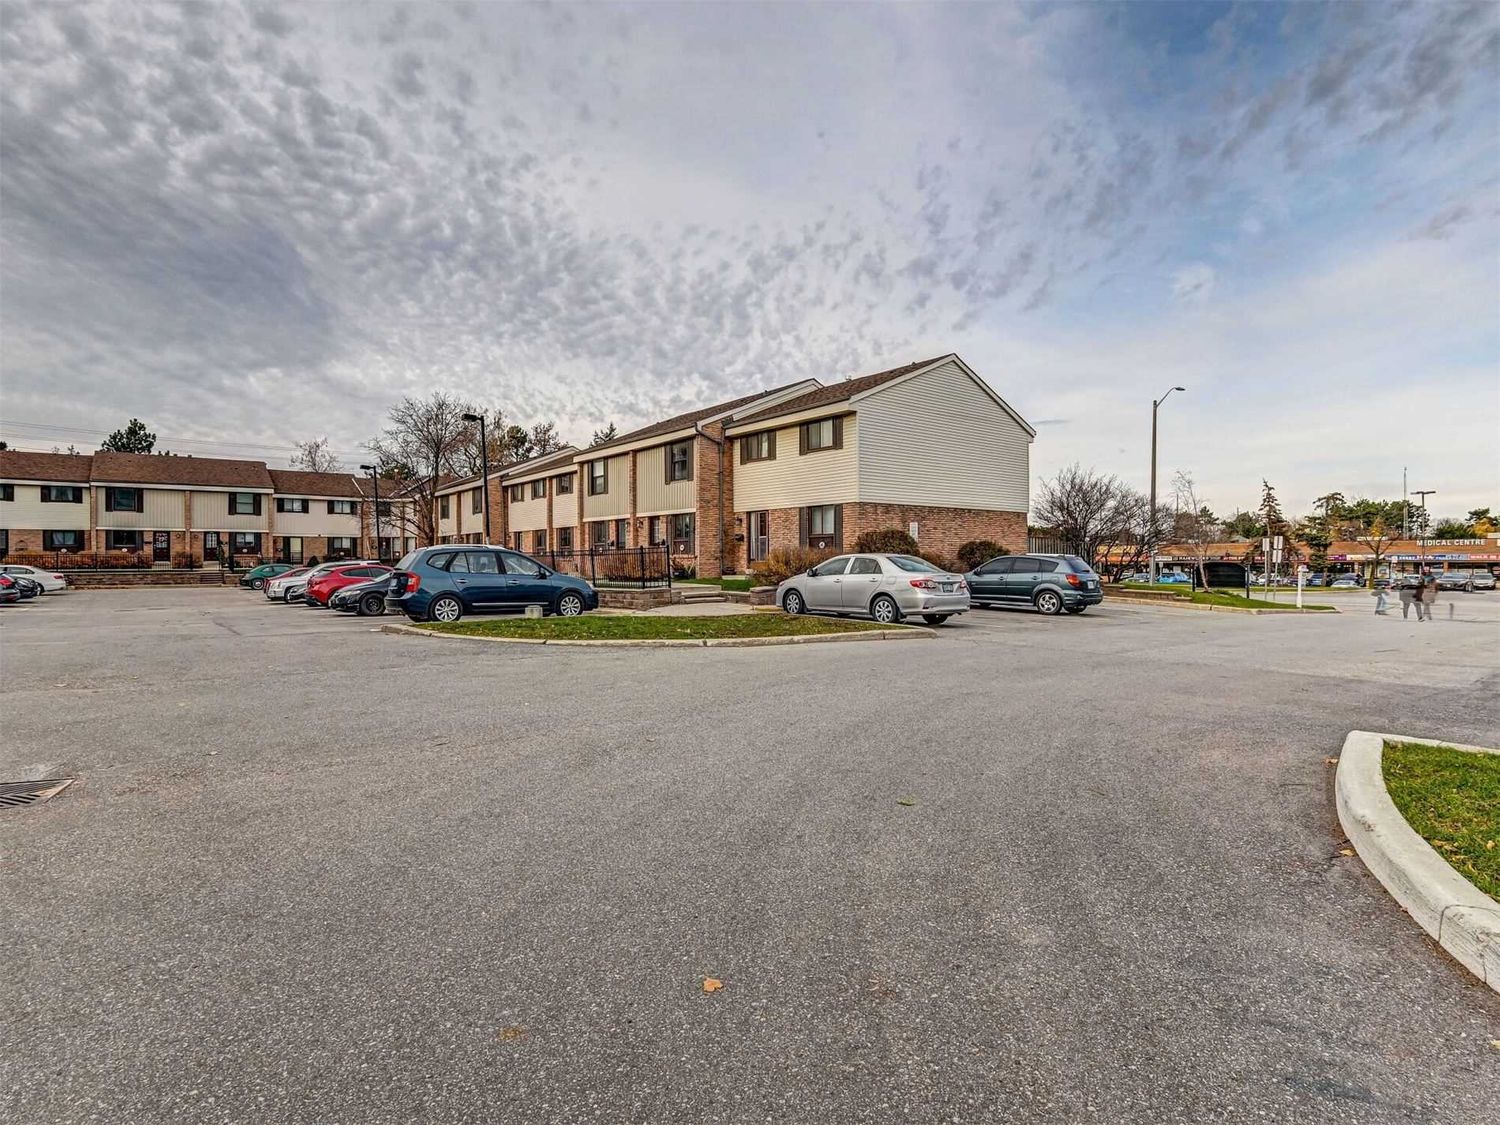 2779 Gananoque Drive. 2779 Gananoque Drive Townhomes is located in  Mississauga, Toronto - image #2 of 2